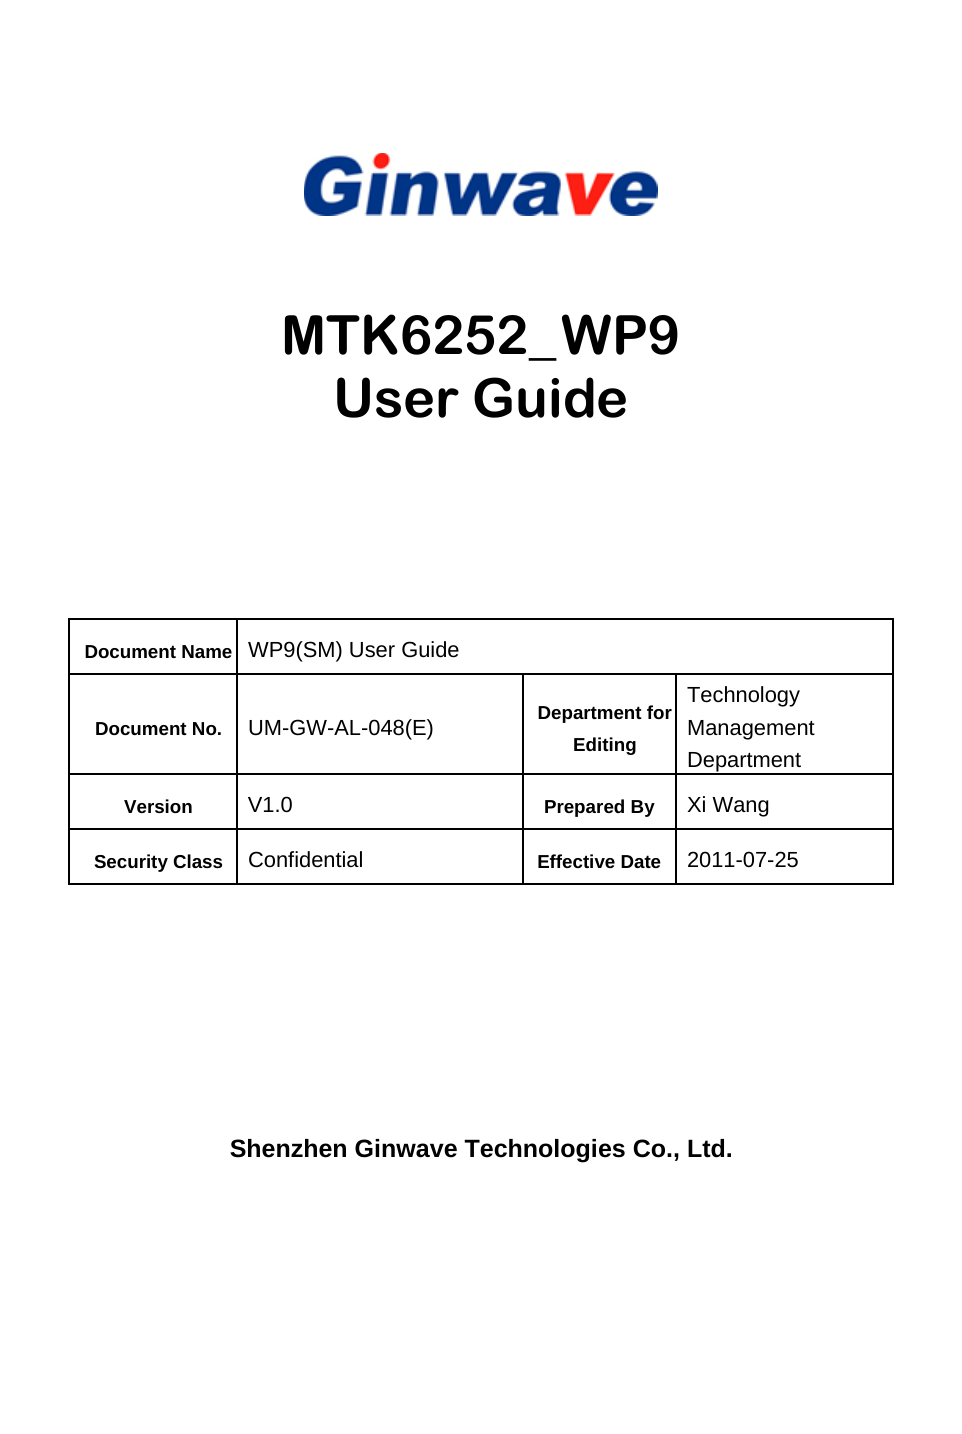        MTK6252_ WP9 User Guide      Document Name WP9(SM) User Guide Document No.  UM-GW-AL-048(E)  Department for Editing Technology Management Department Version  V1.0  Prepared By  Xi Wang Security Class  Confidential  Effective Date 2011-07-25       Shenzhen Ginwave Technologies Co., Ltd.  